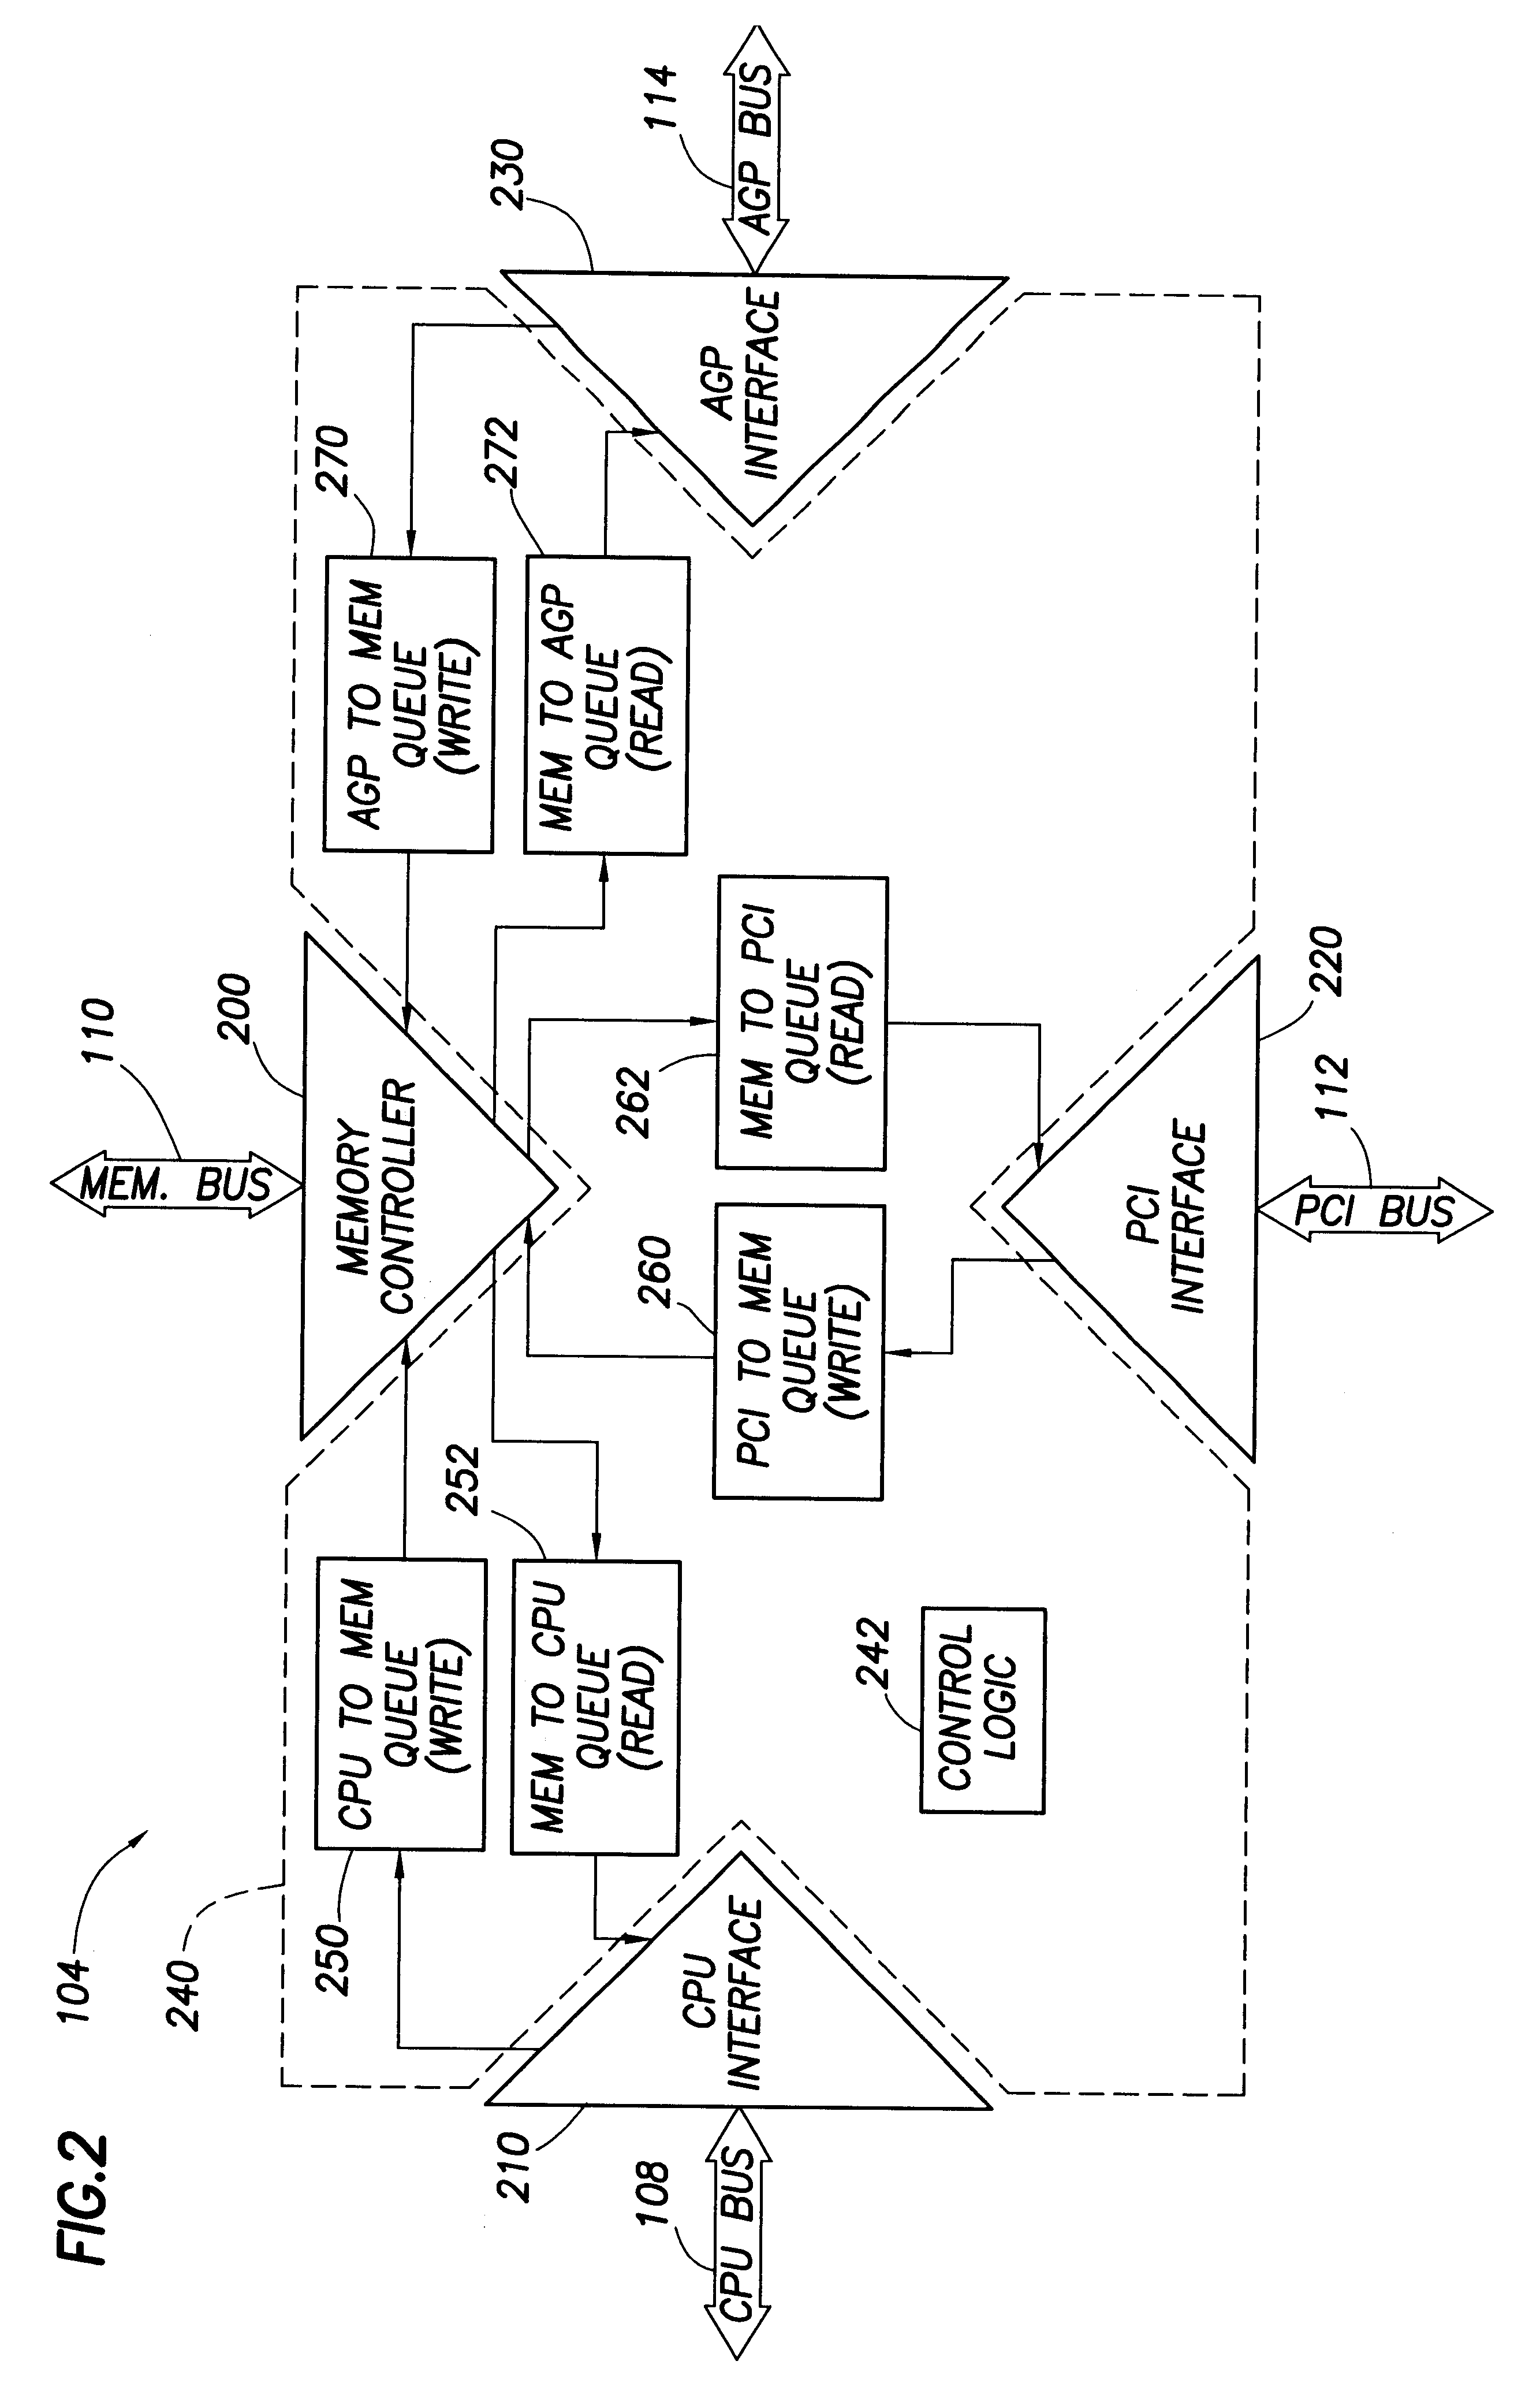 Computer system with adaptive memory arbitration scheme